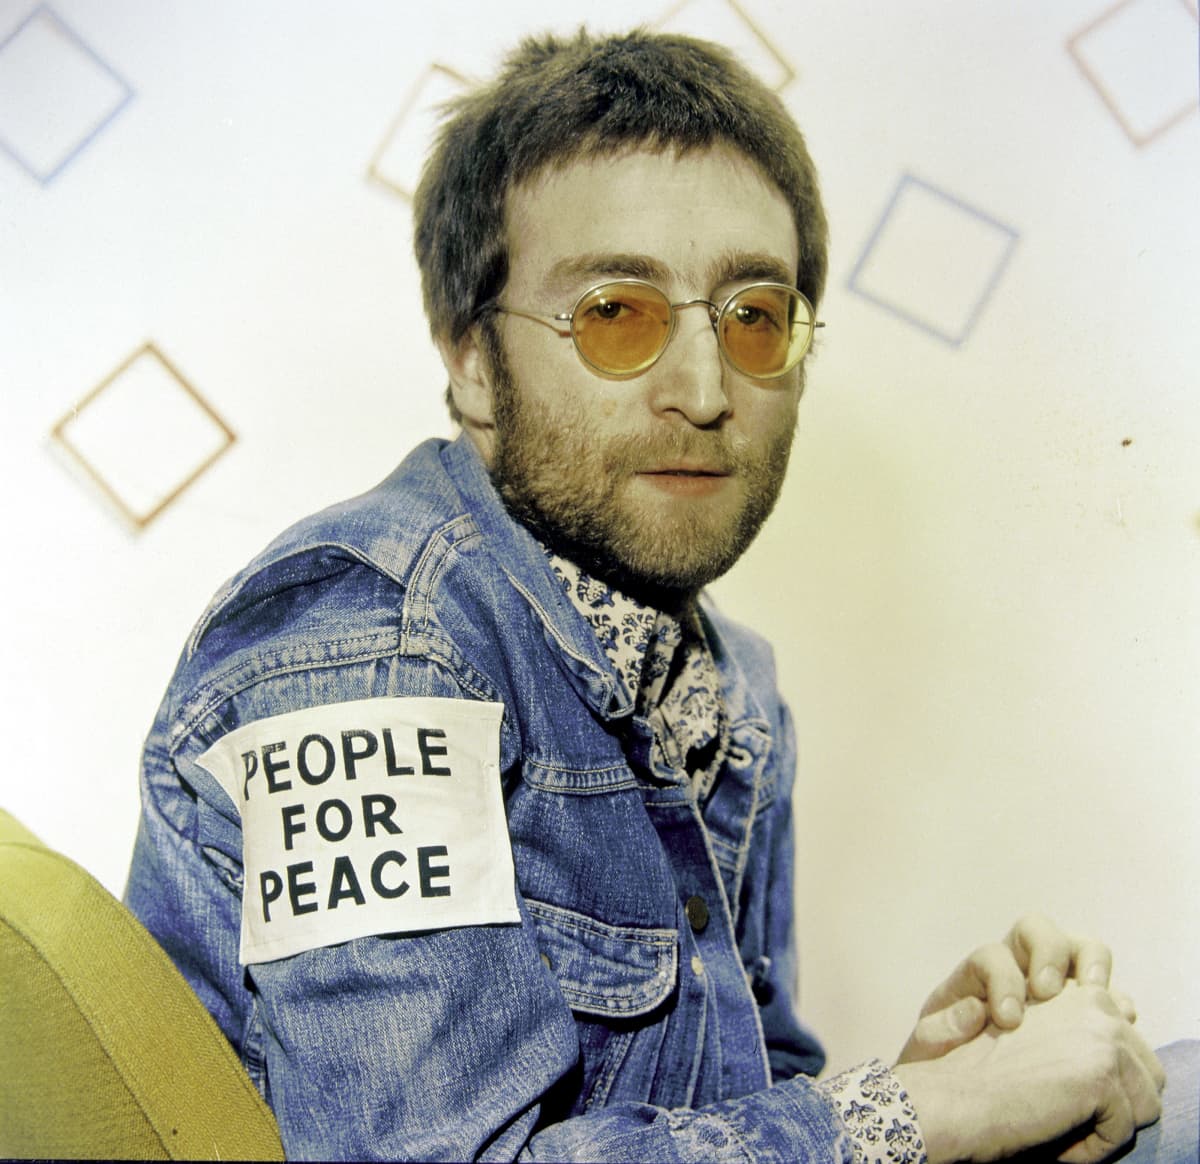 Imagine By John Lennon 9 Facts About The Songs Meaning 